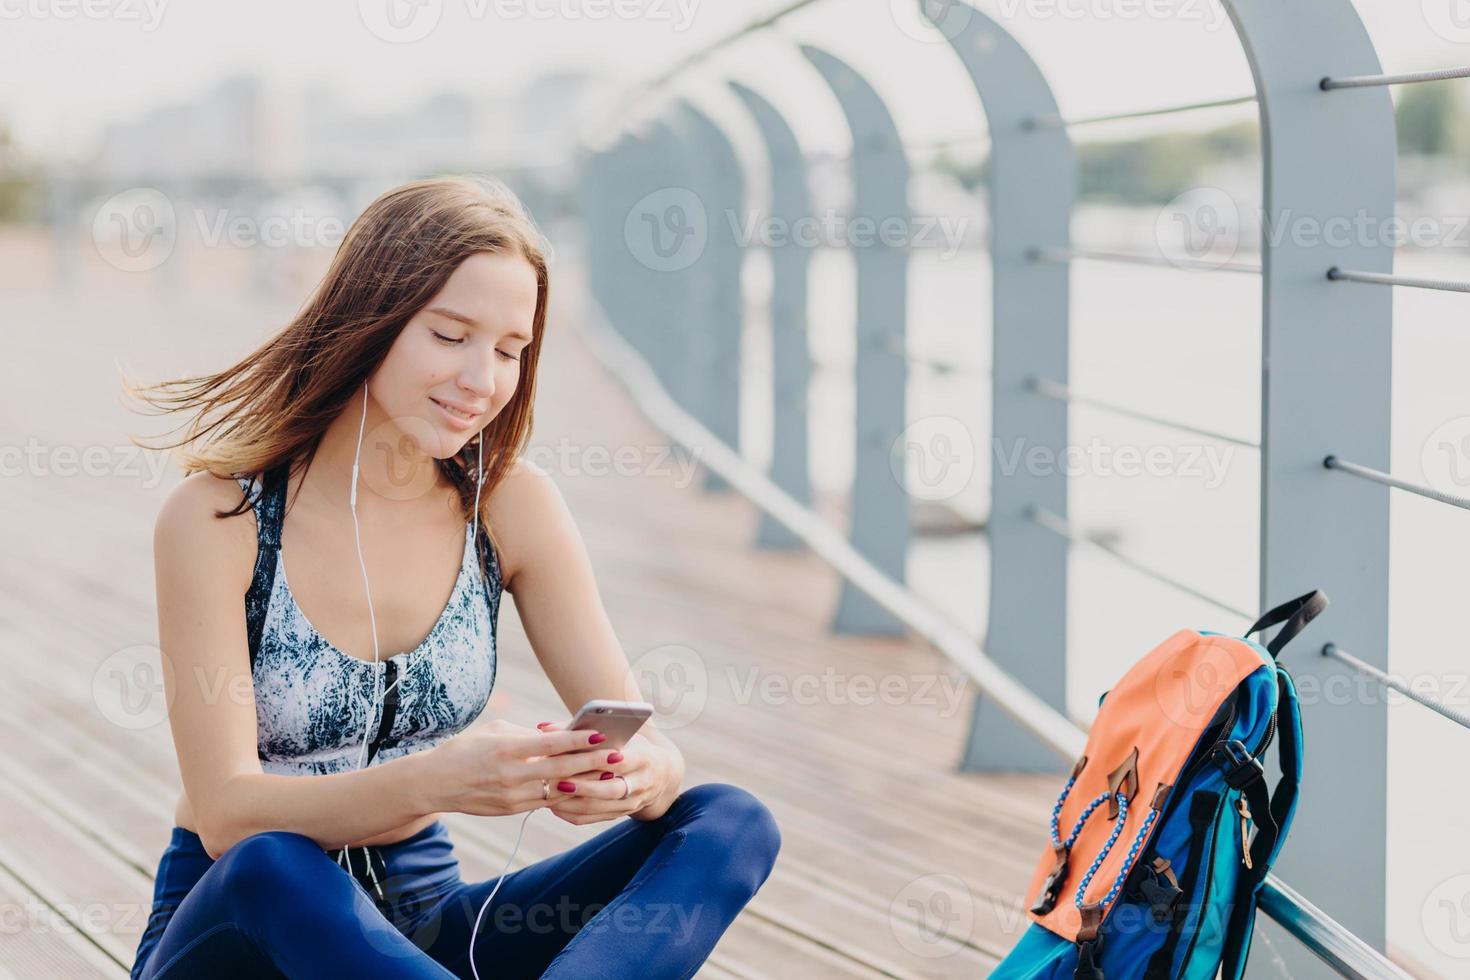 Positive fitness girl in top and leggings, has glad expression as reads pleasant text message recieved from boyfriend, has dark hair, rests outdoor. People, sport, modern technologies and lifestyle photo